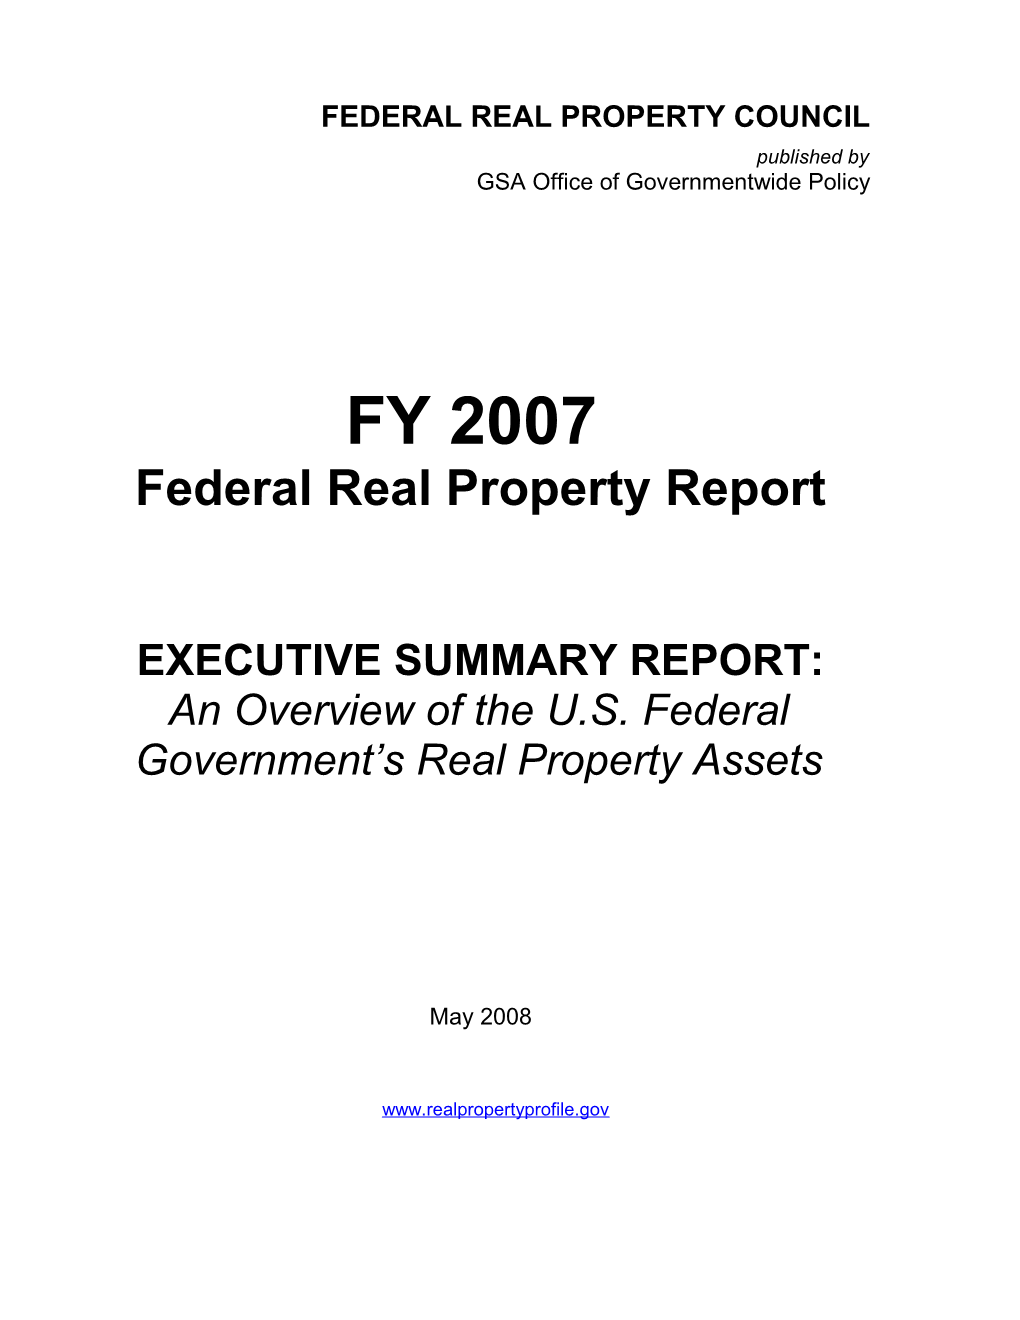 Federal Real Property Report